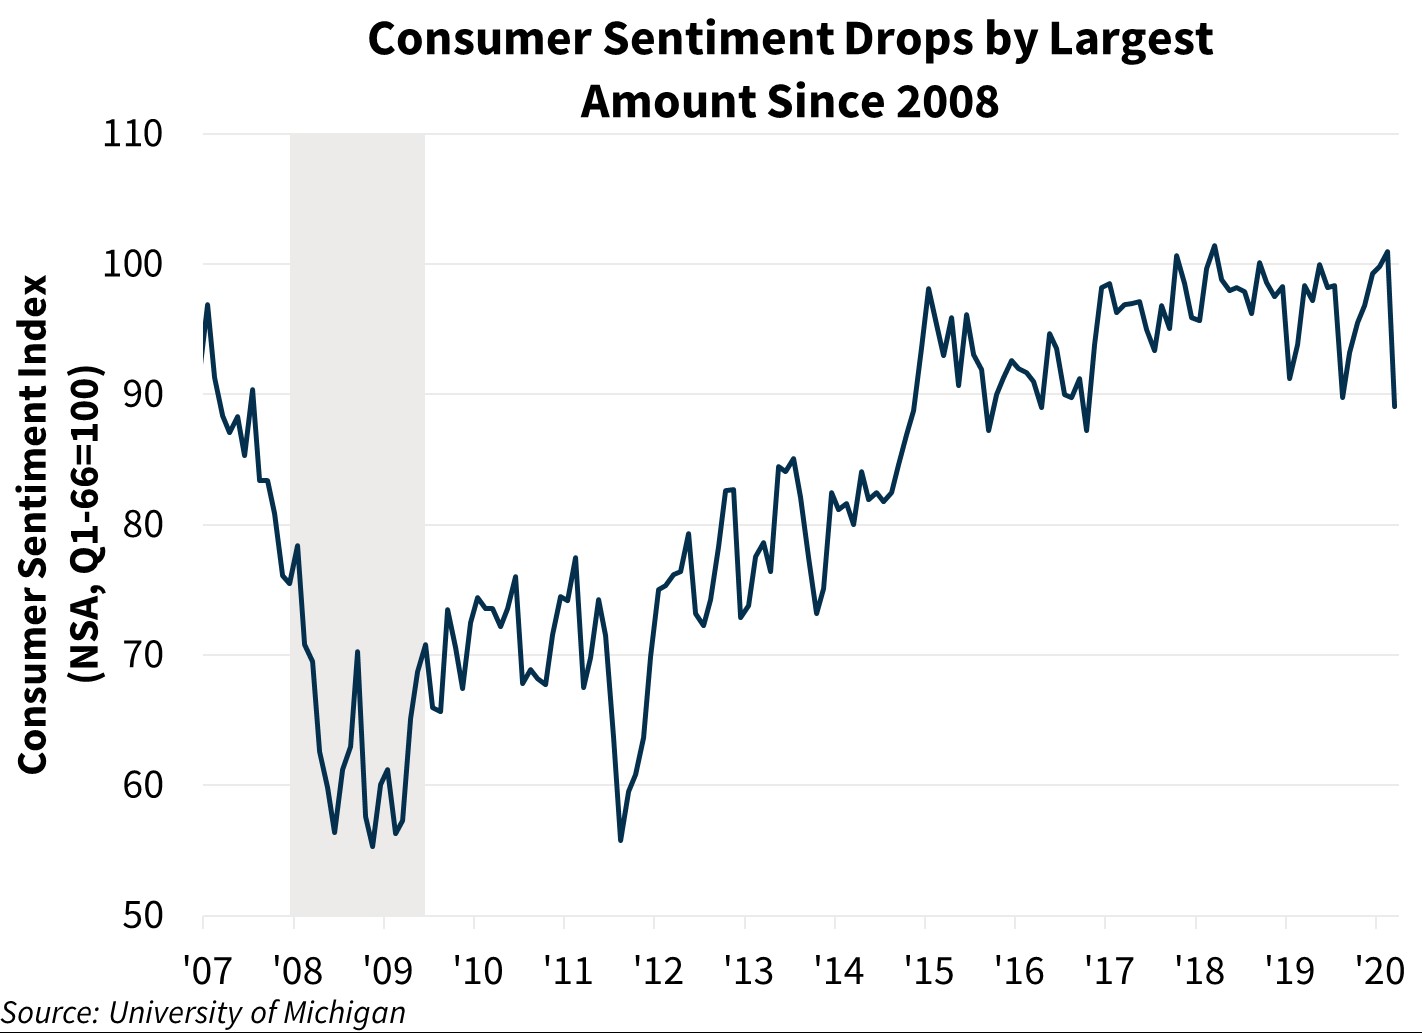 Consumer Sentiment Drops by Largest Amount Since 2008